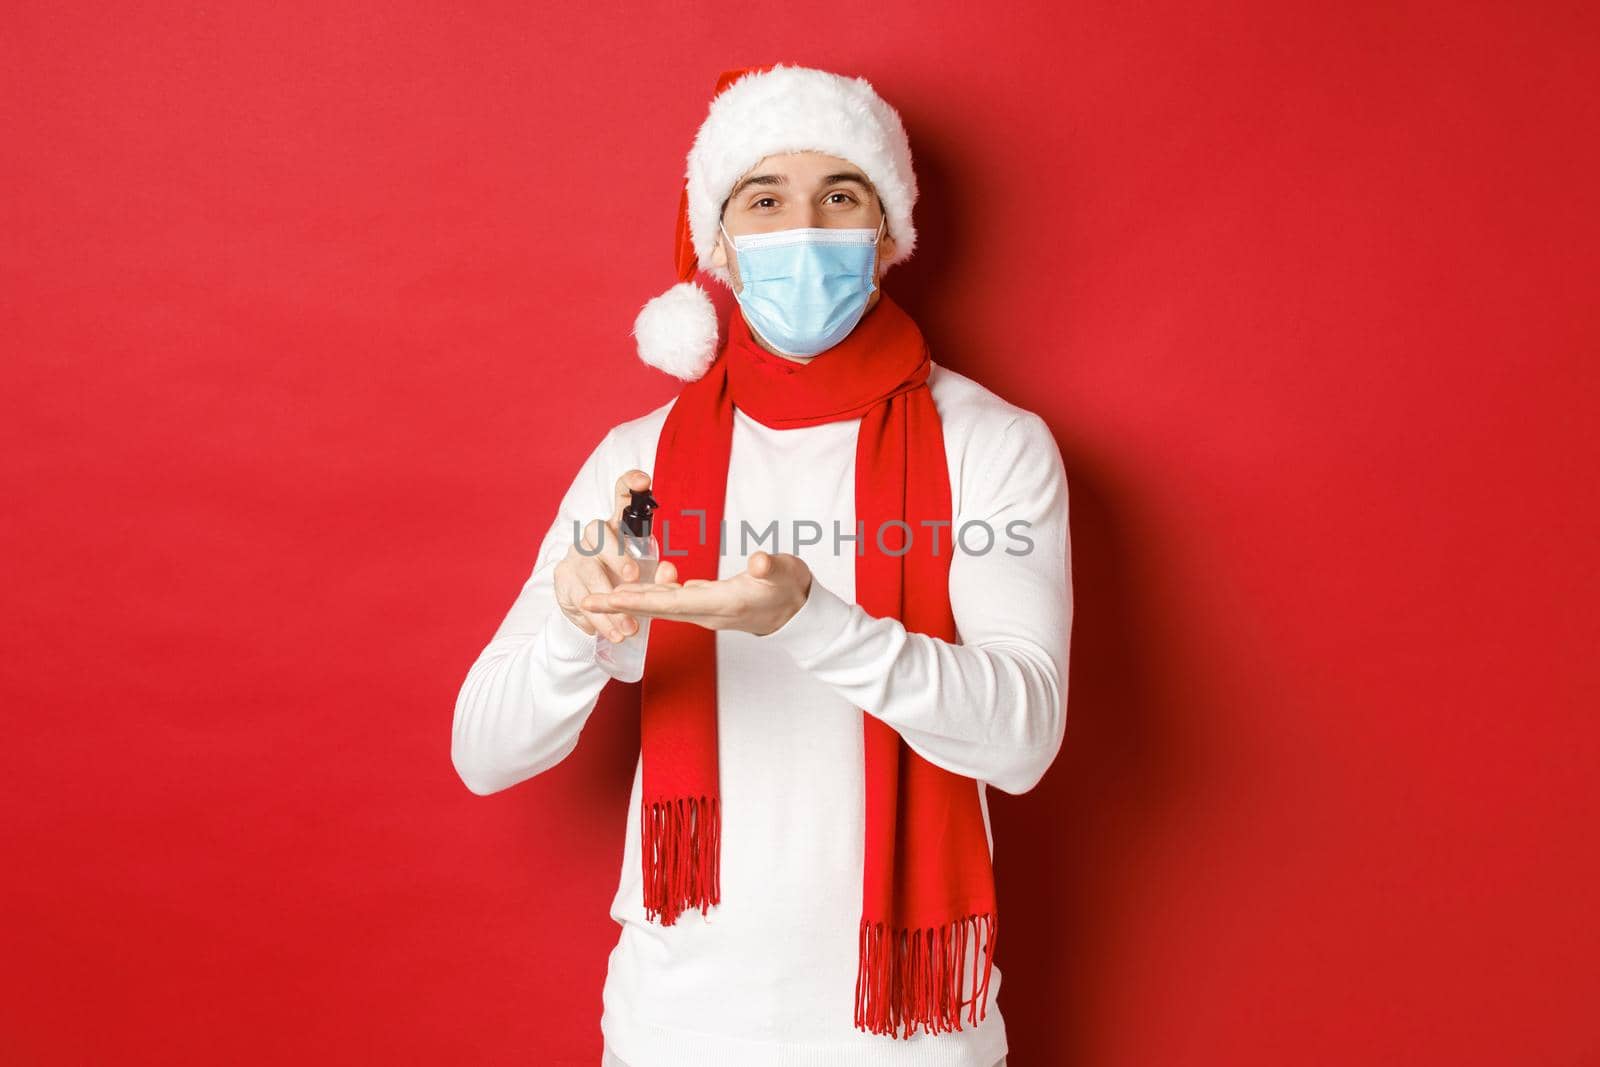 Concept of covid-19, christmas and holidays during pandemic. Happy young man in santa hat and medical mask, sanitize hands with antiseptic and smiling, standing over red background.